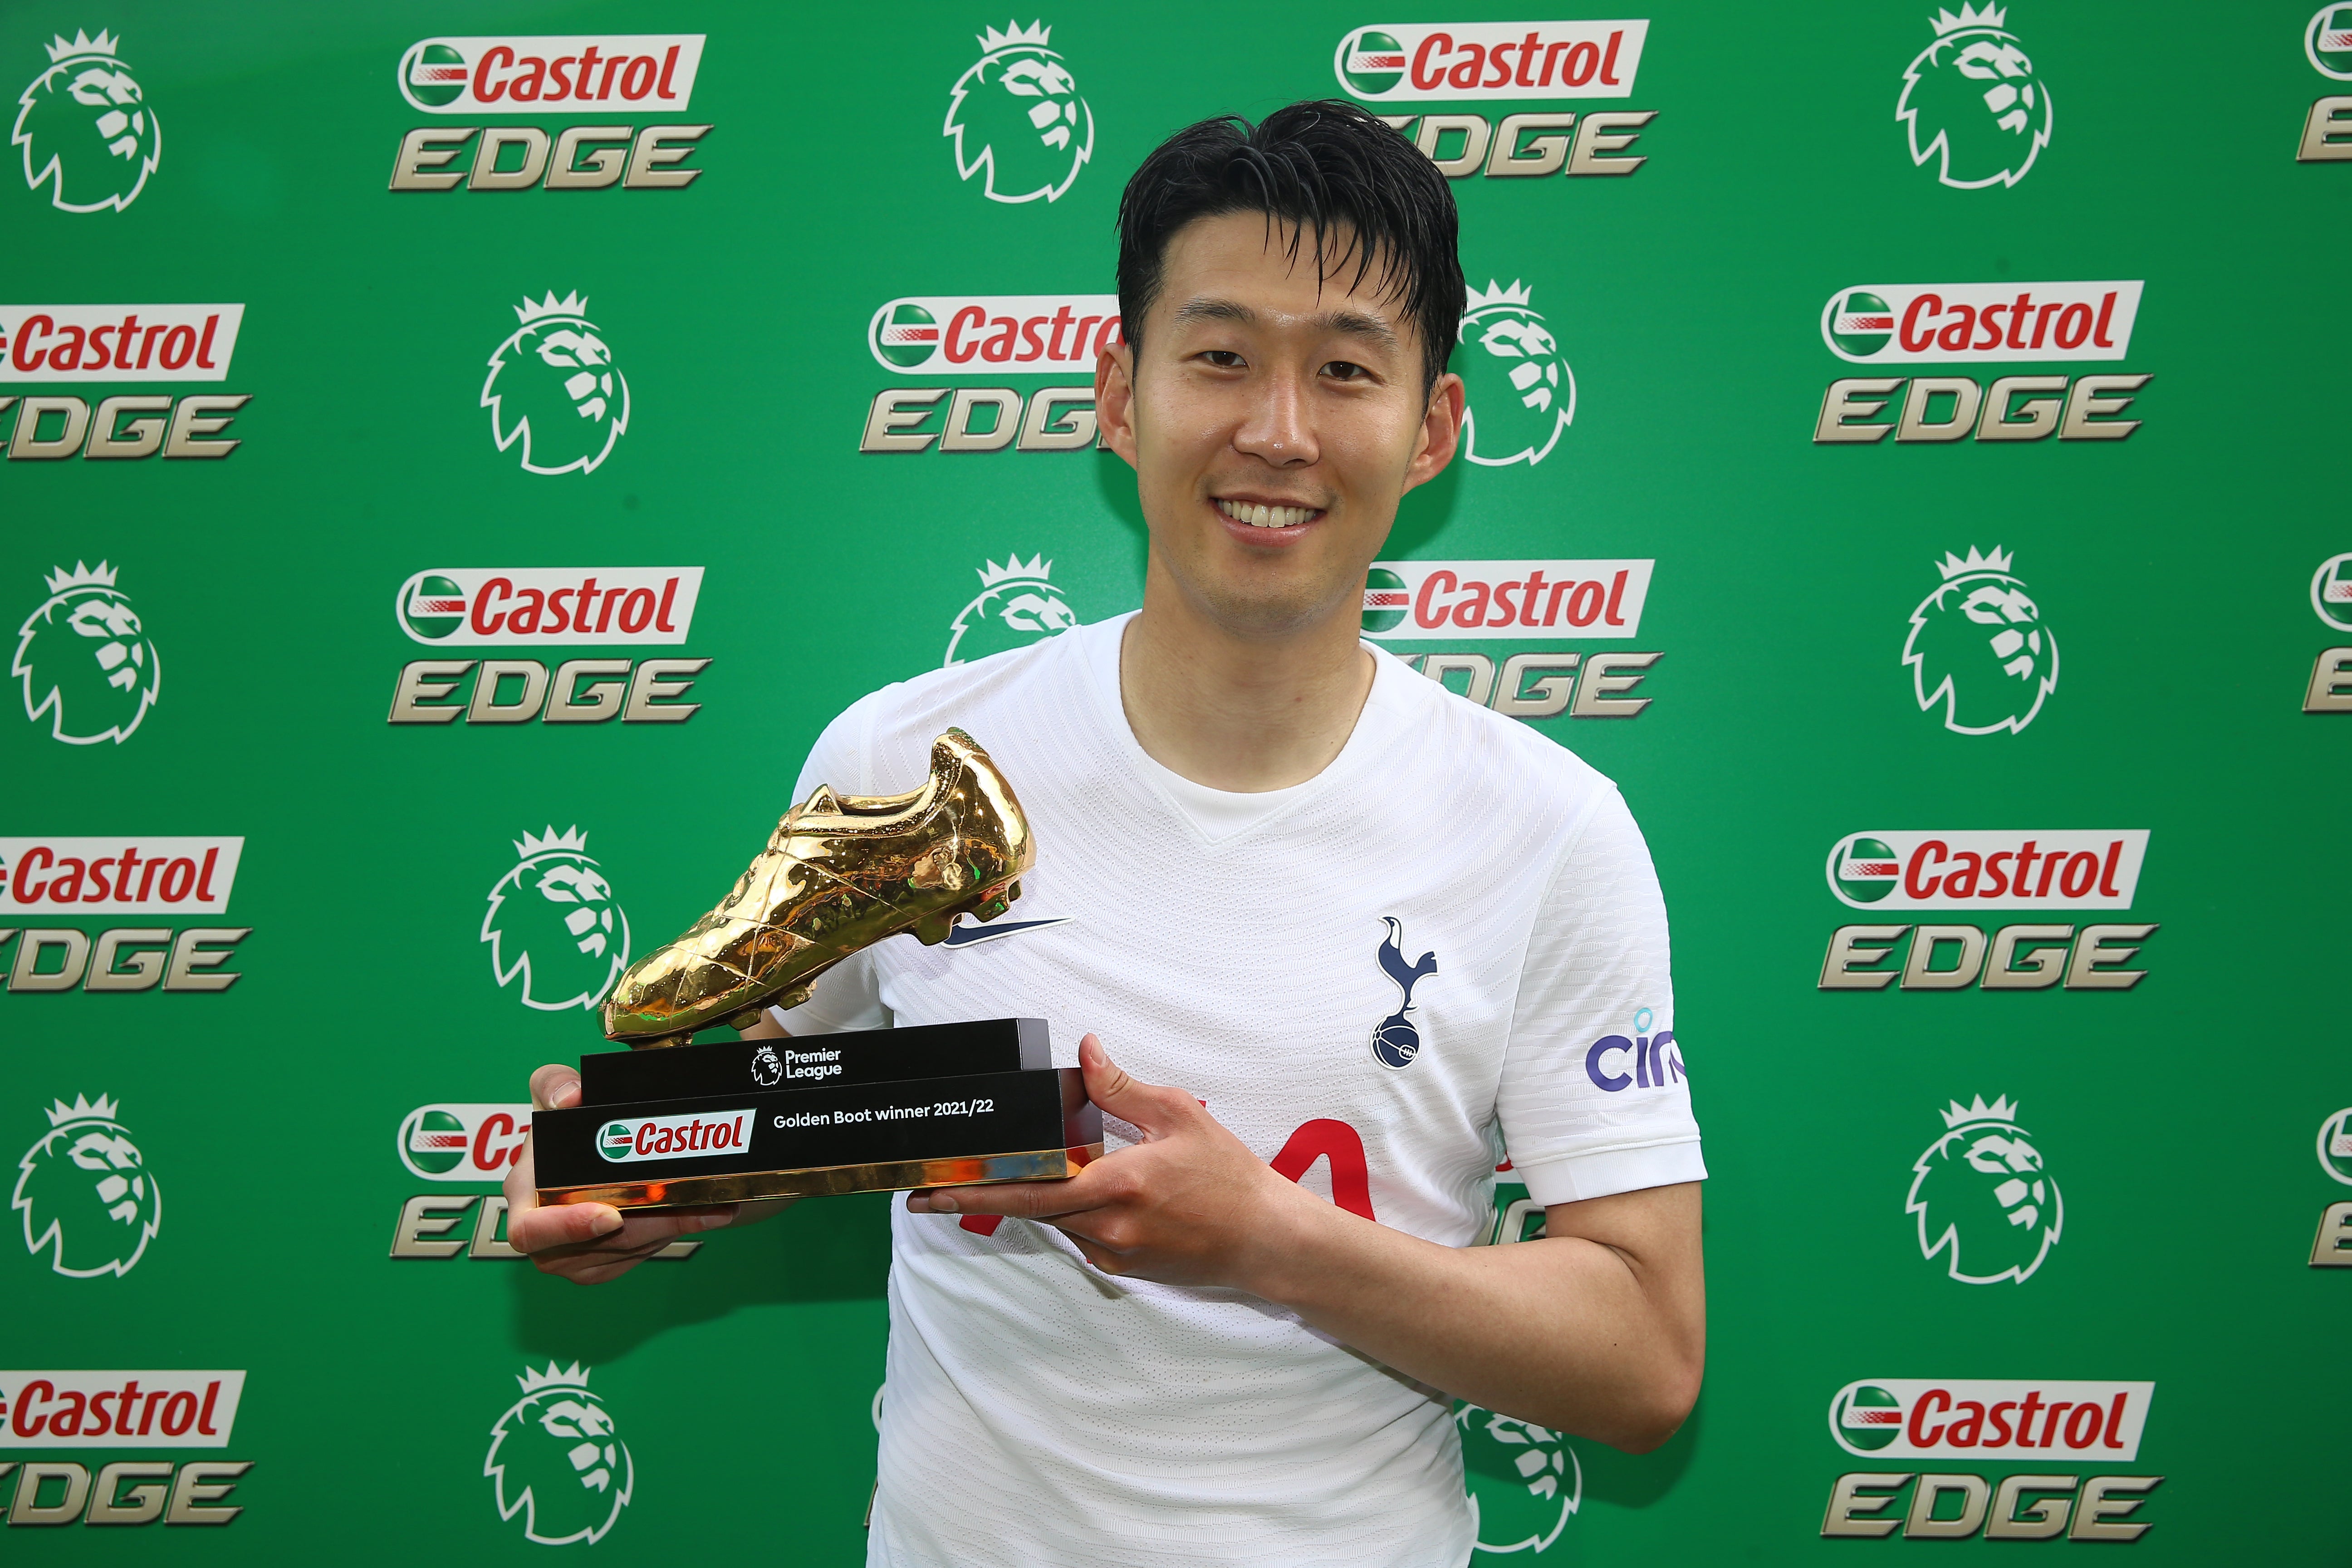 Tottenham’s Son Heung-min poses with the Golden Boot after reaching 23 goals for the season (Nigel French/PA)